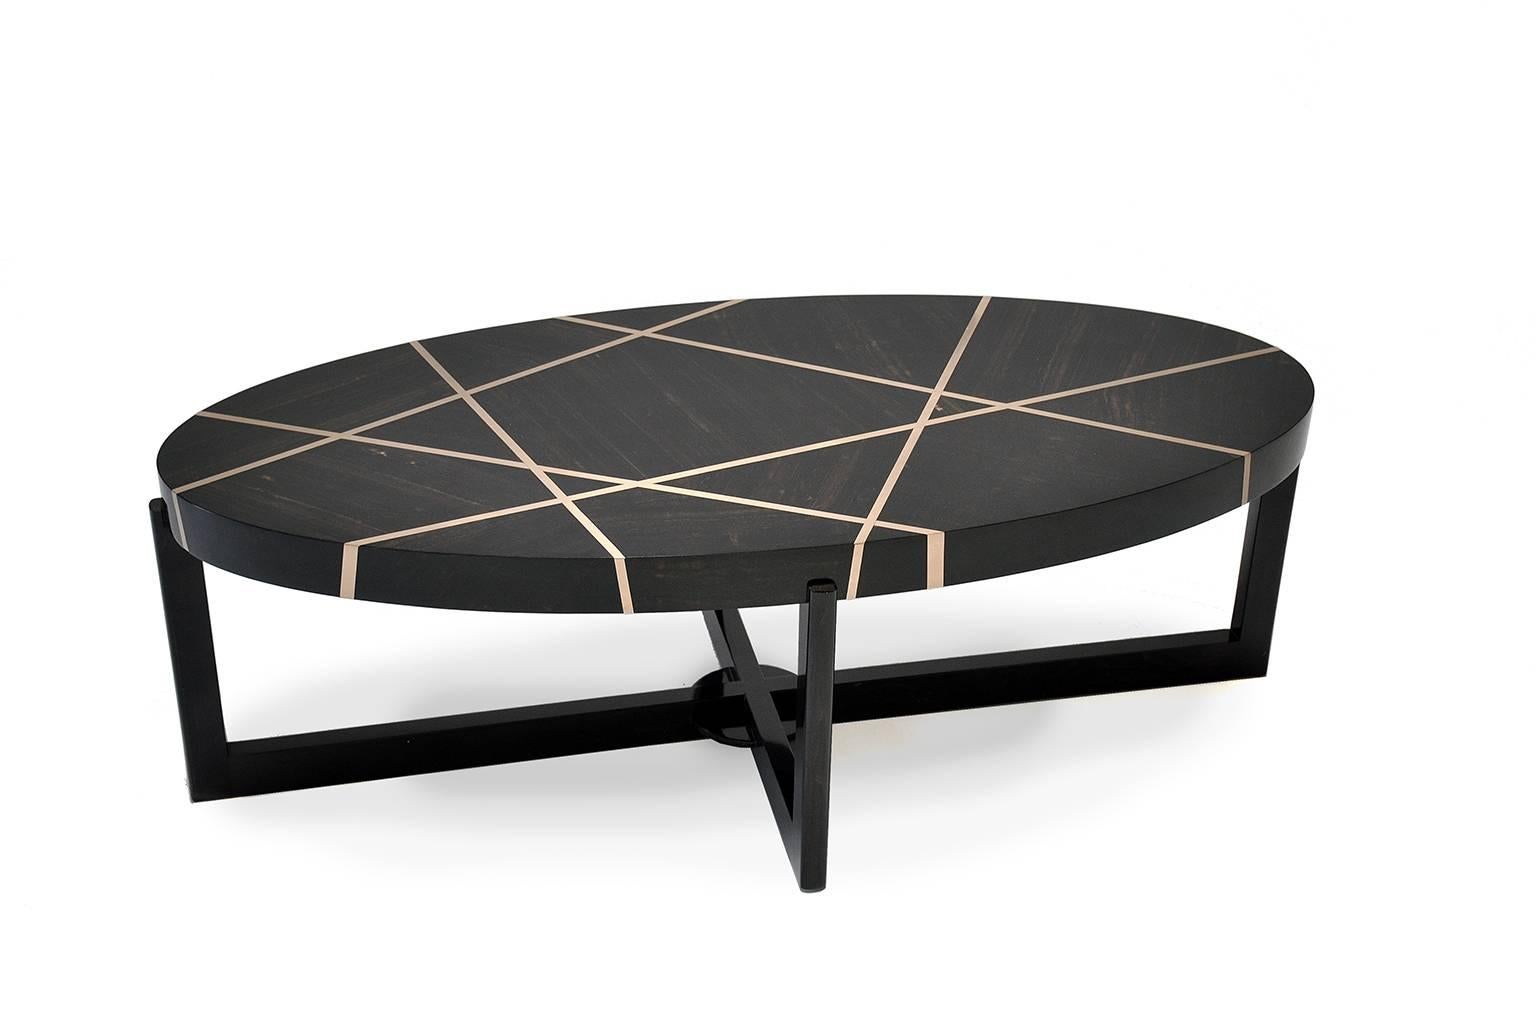 The ray cocktail table in ebony and bronze is created to be a notable piece. It is at once rich, luxurious and complicated, while maintaining a serious and serene form.

Gabon ebony is a member of the diospyros family and comes from northern